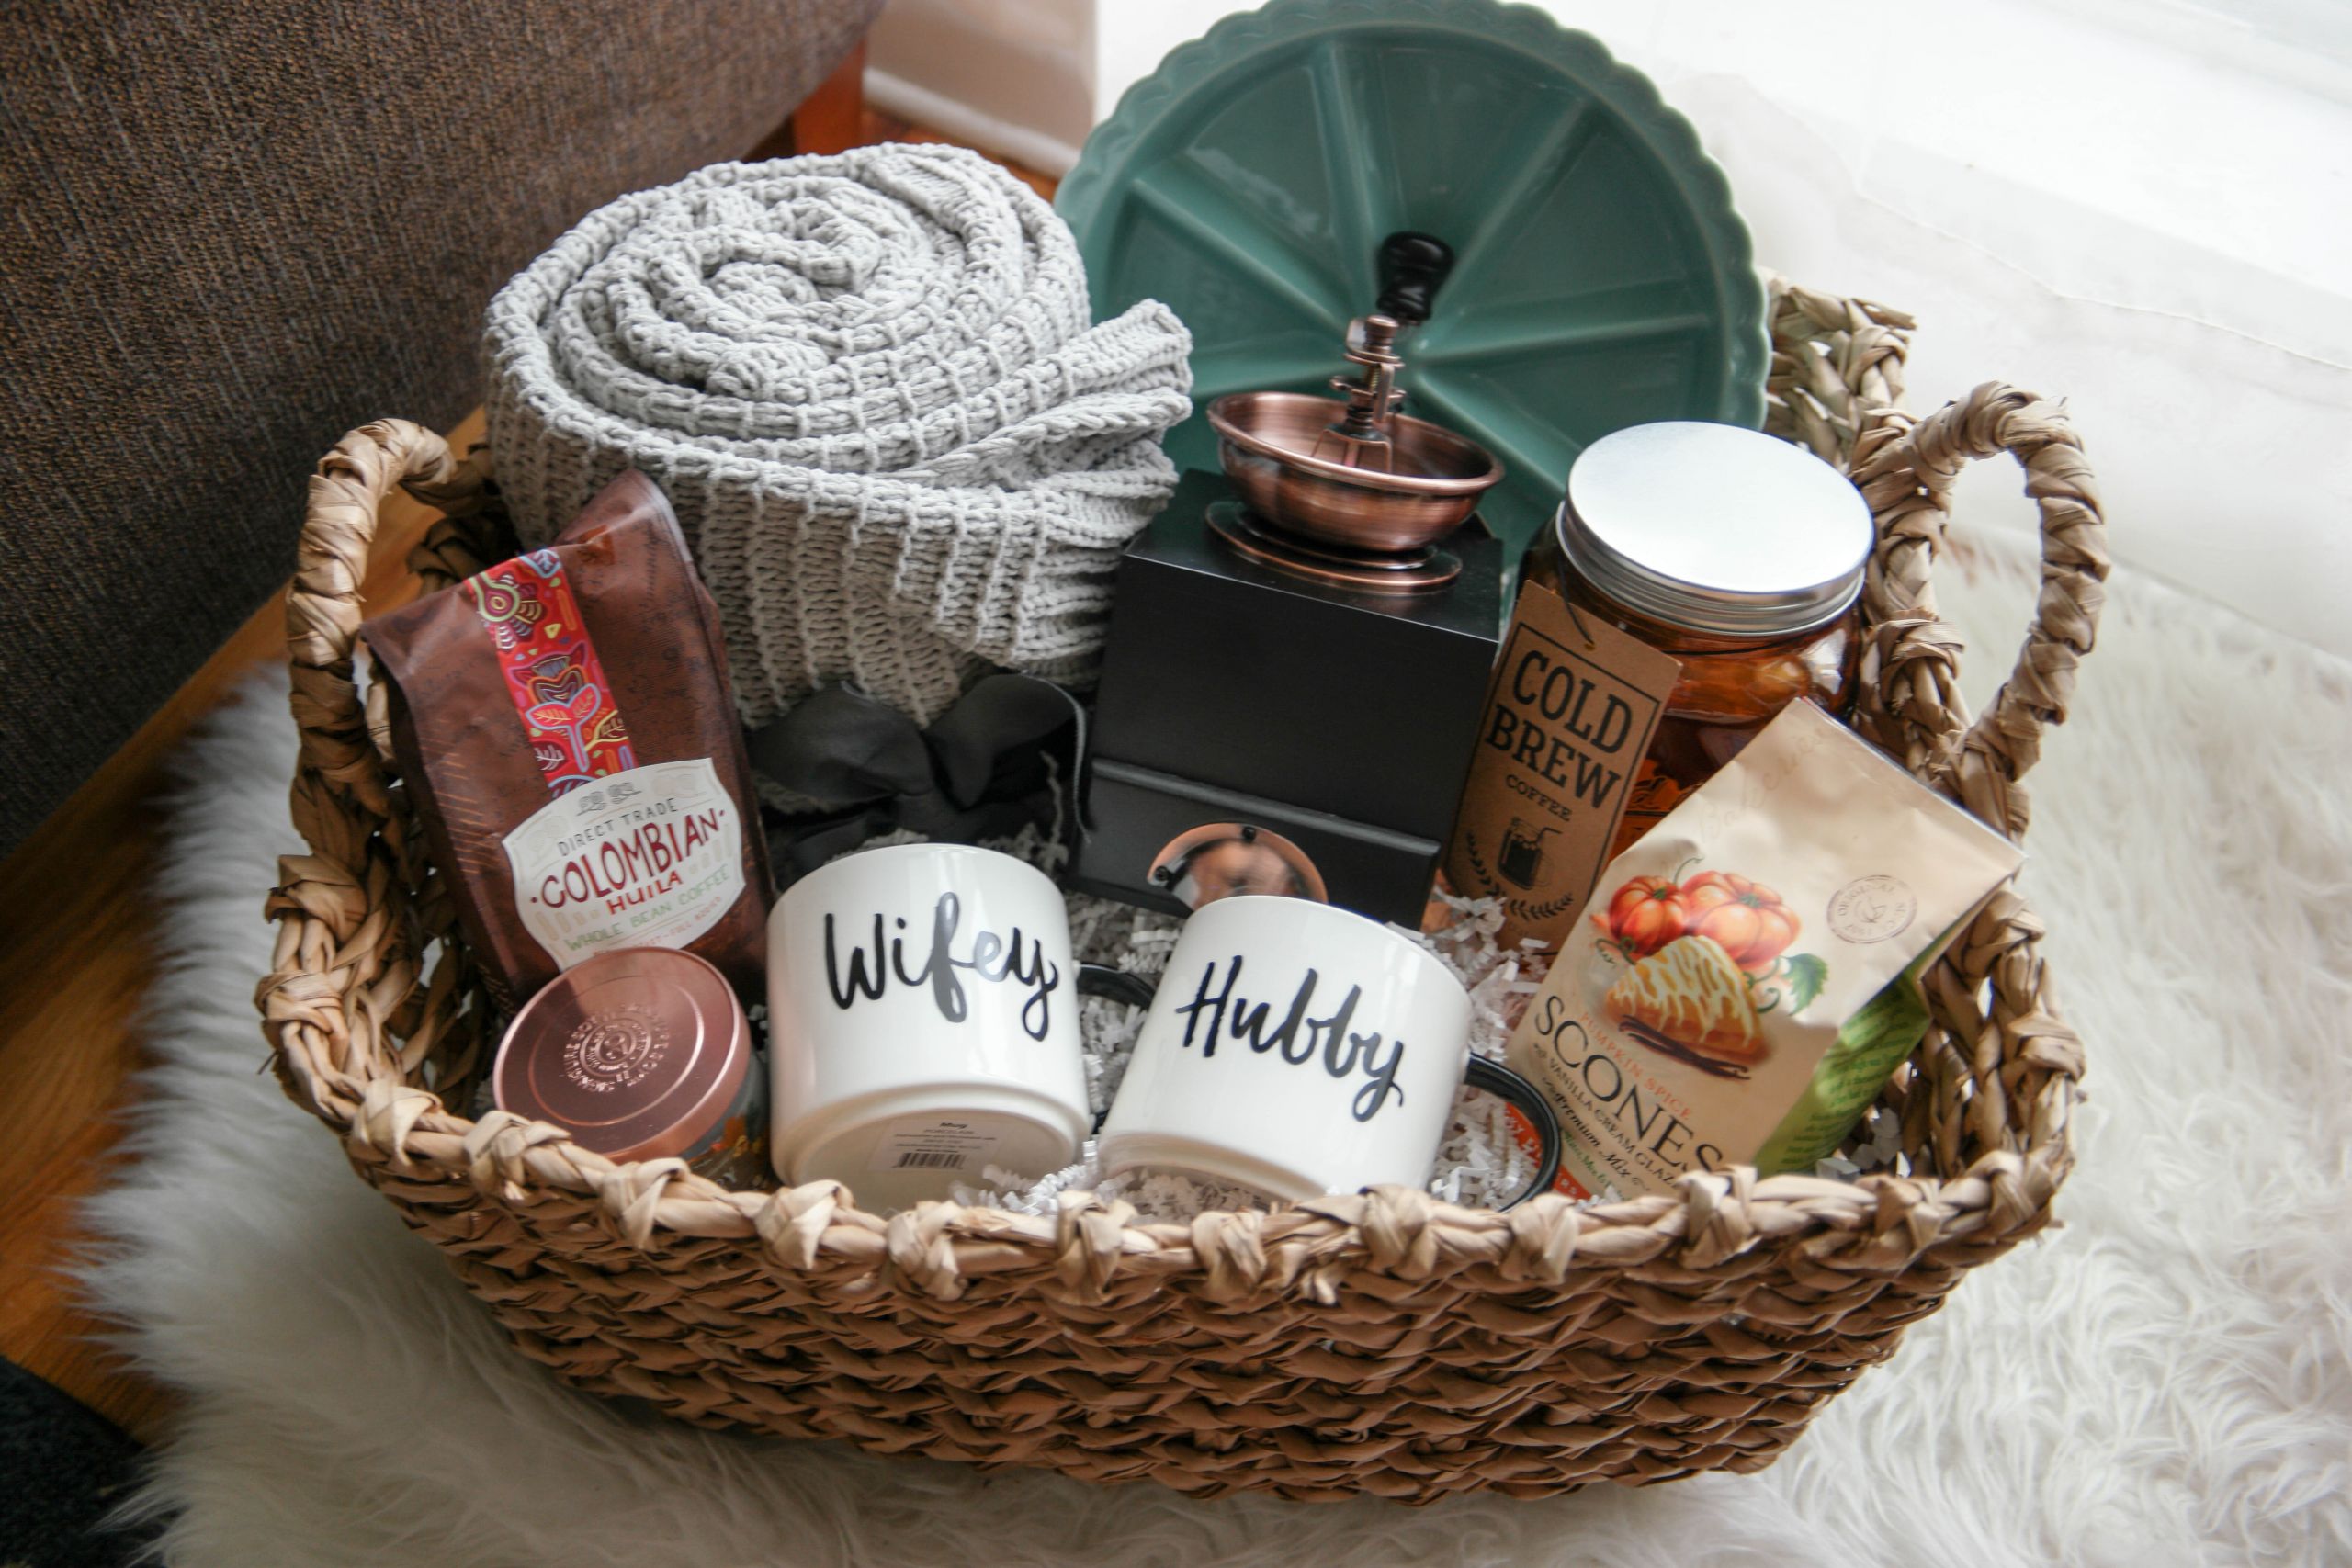 Honeymoon Gift Ideas Couples
 A Cozy Morning Gift Basket A Perfect Gift For Newlyweds